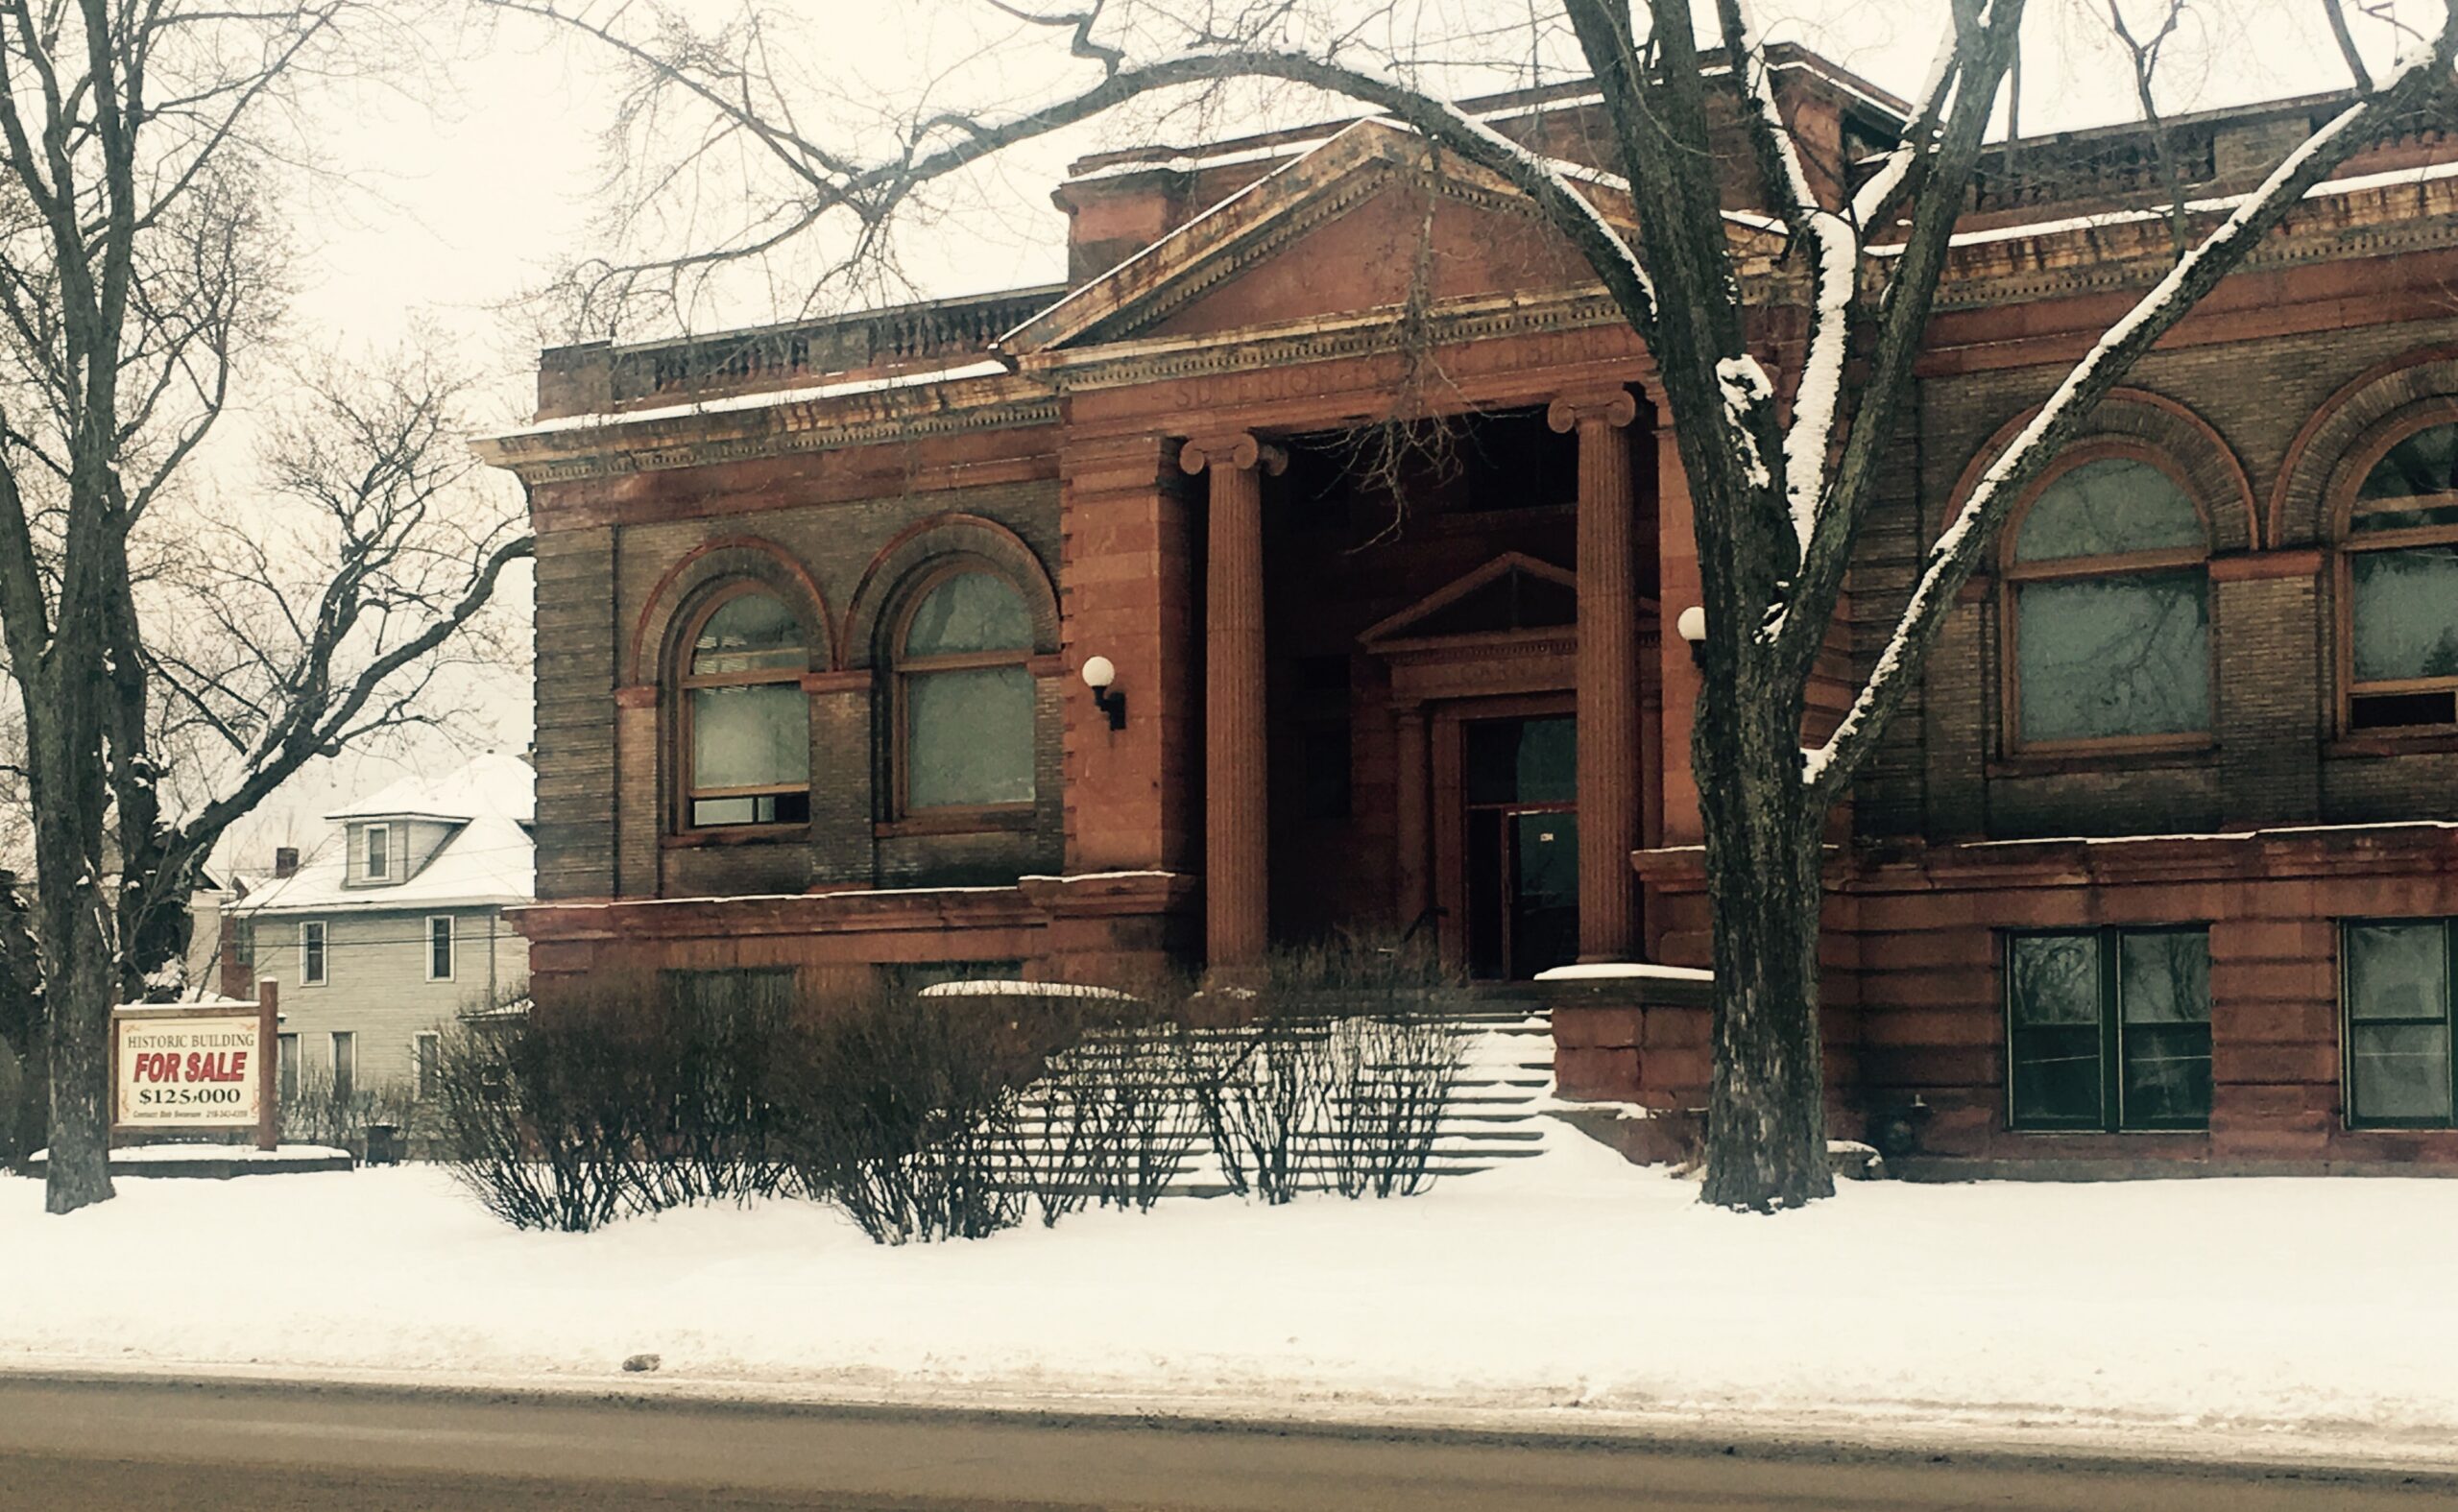 The Carnegie Library on Hammond Avenue in Superior